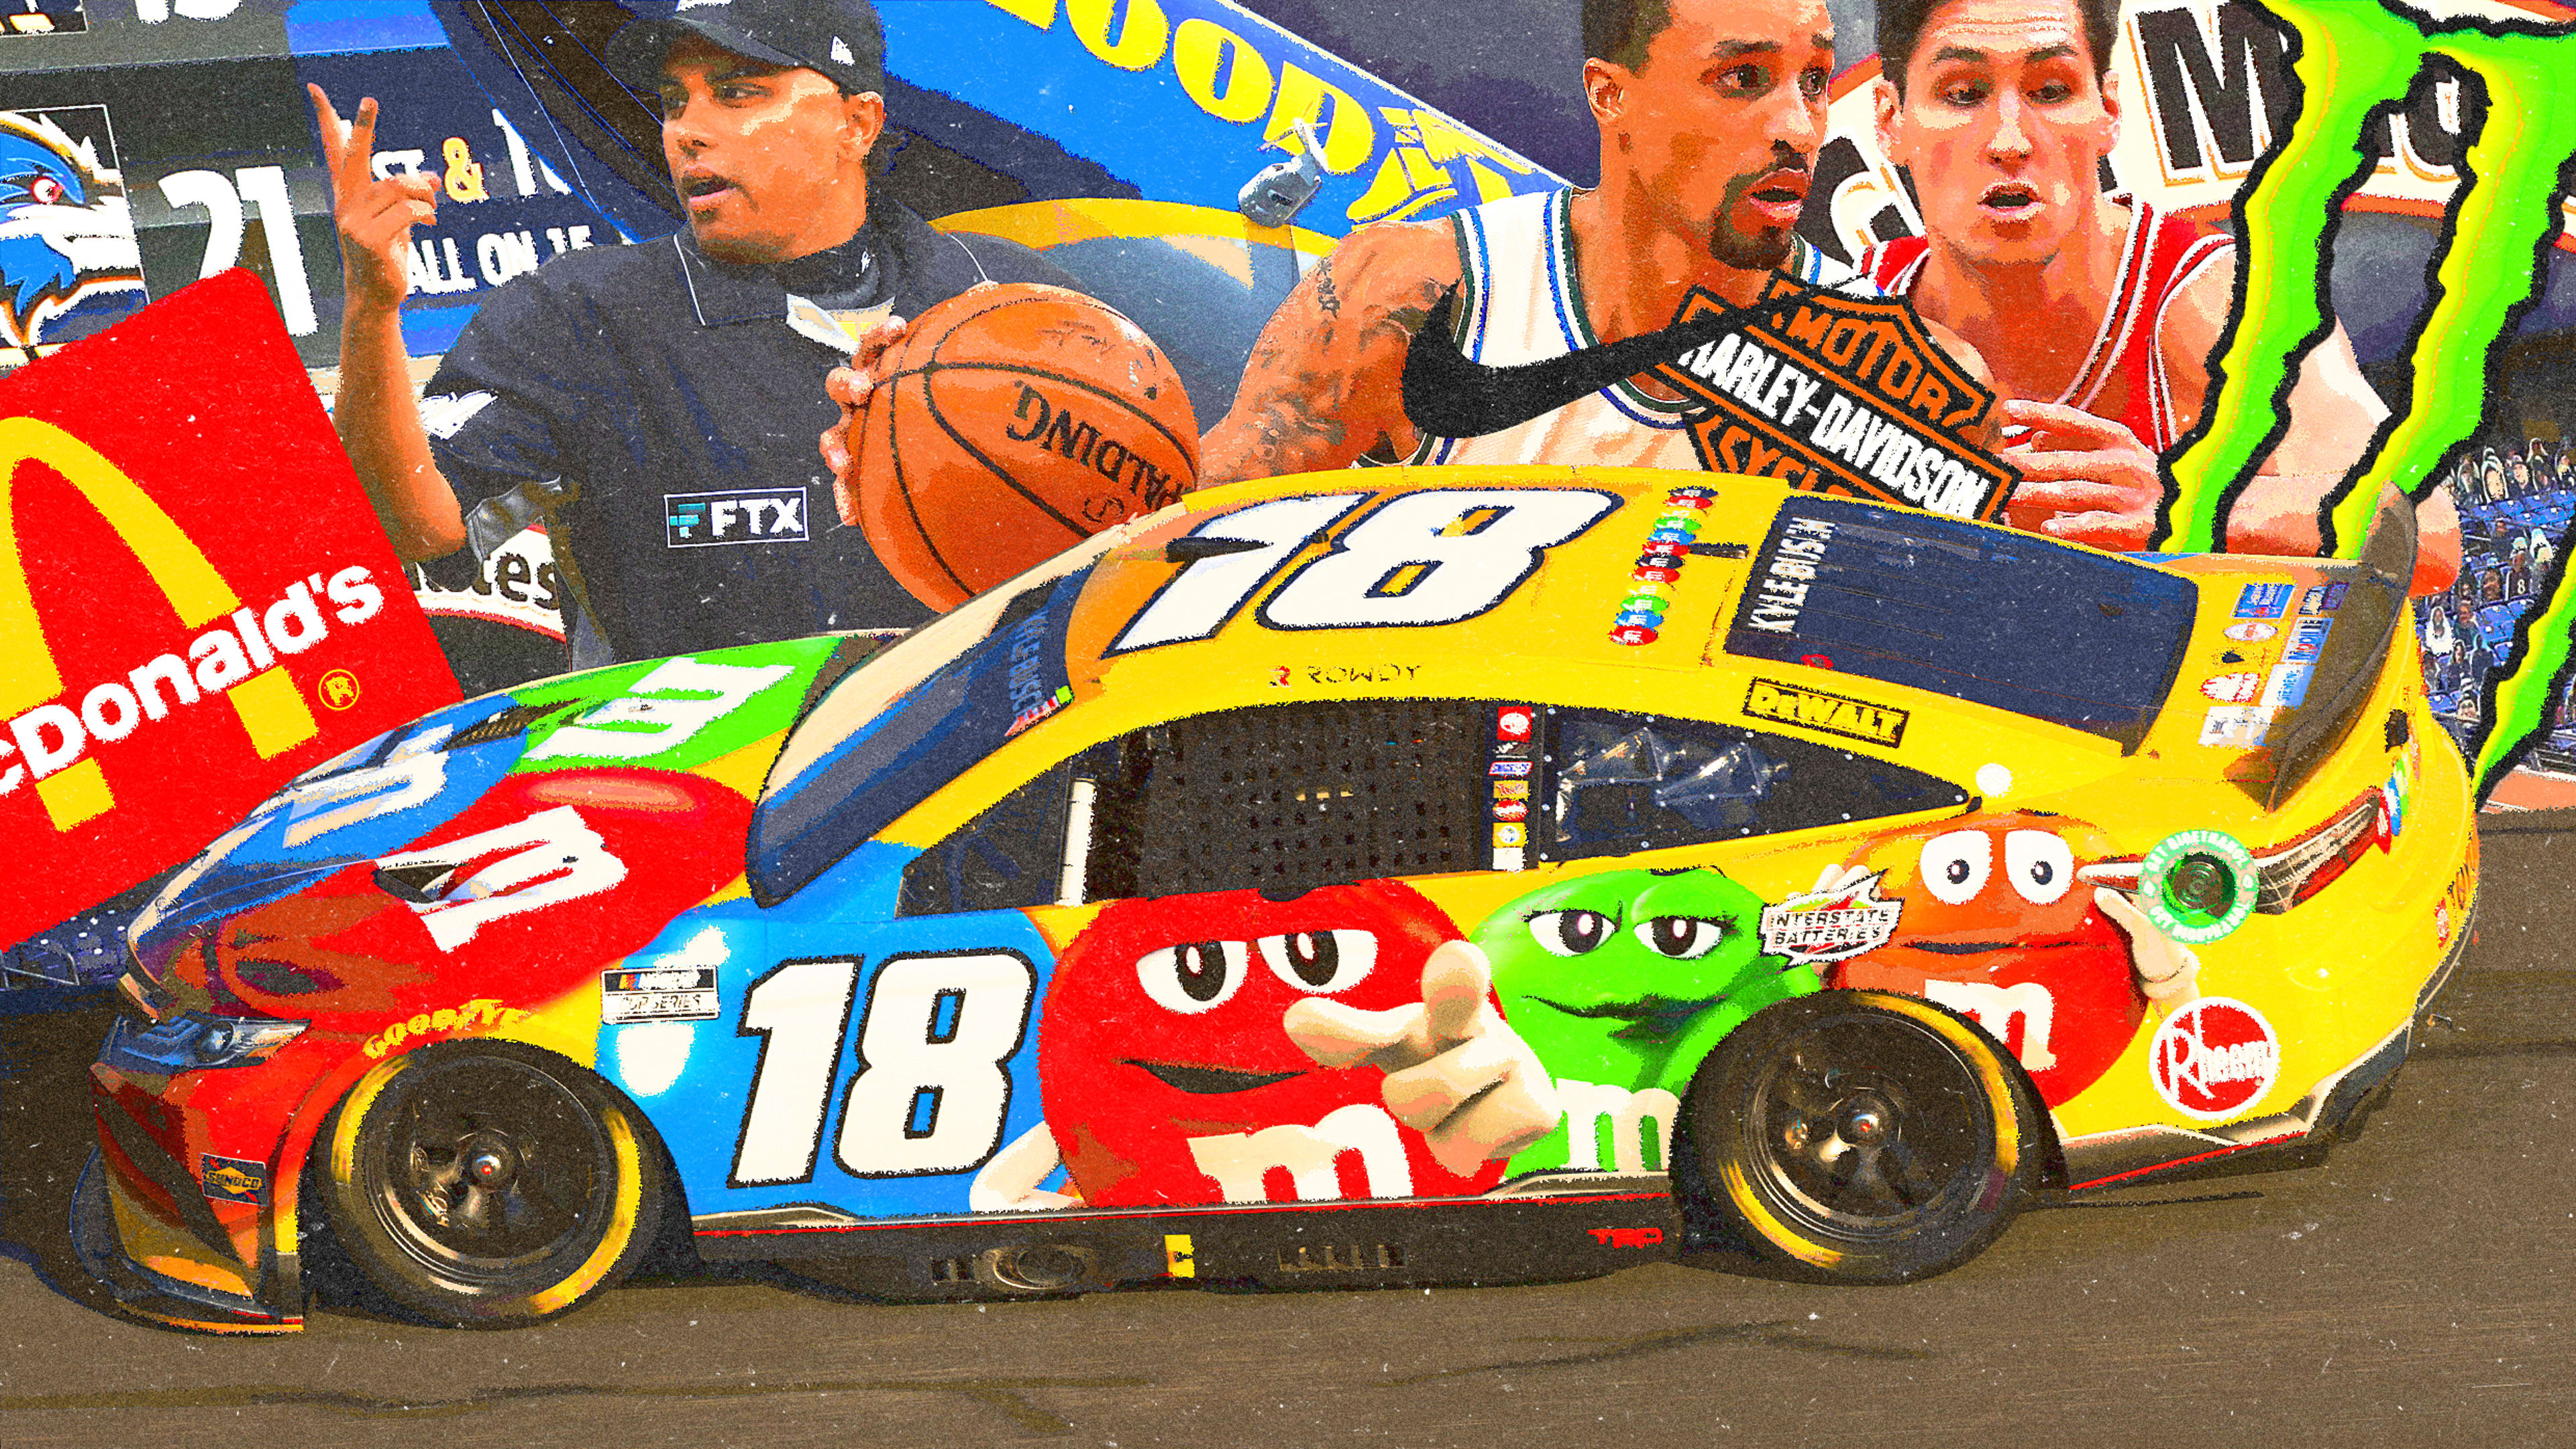 Sports ads are about to get more aggressive—here’s what they could learn from Nascar